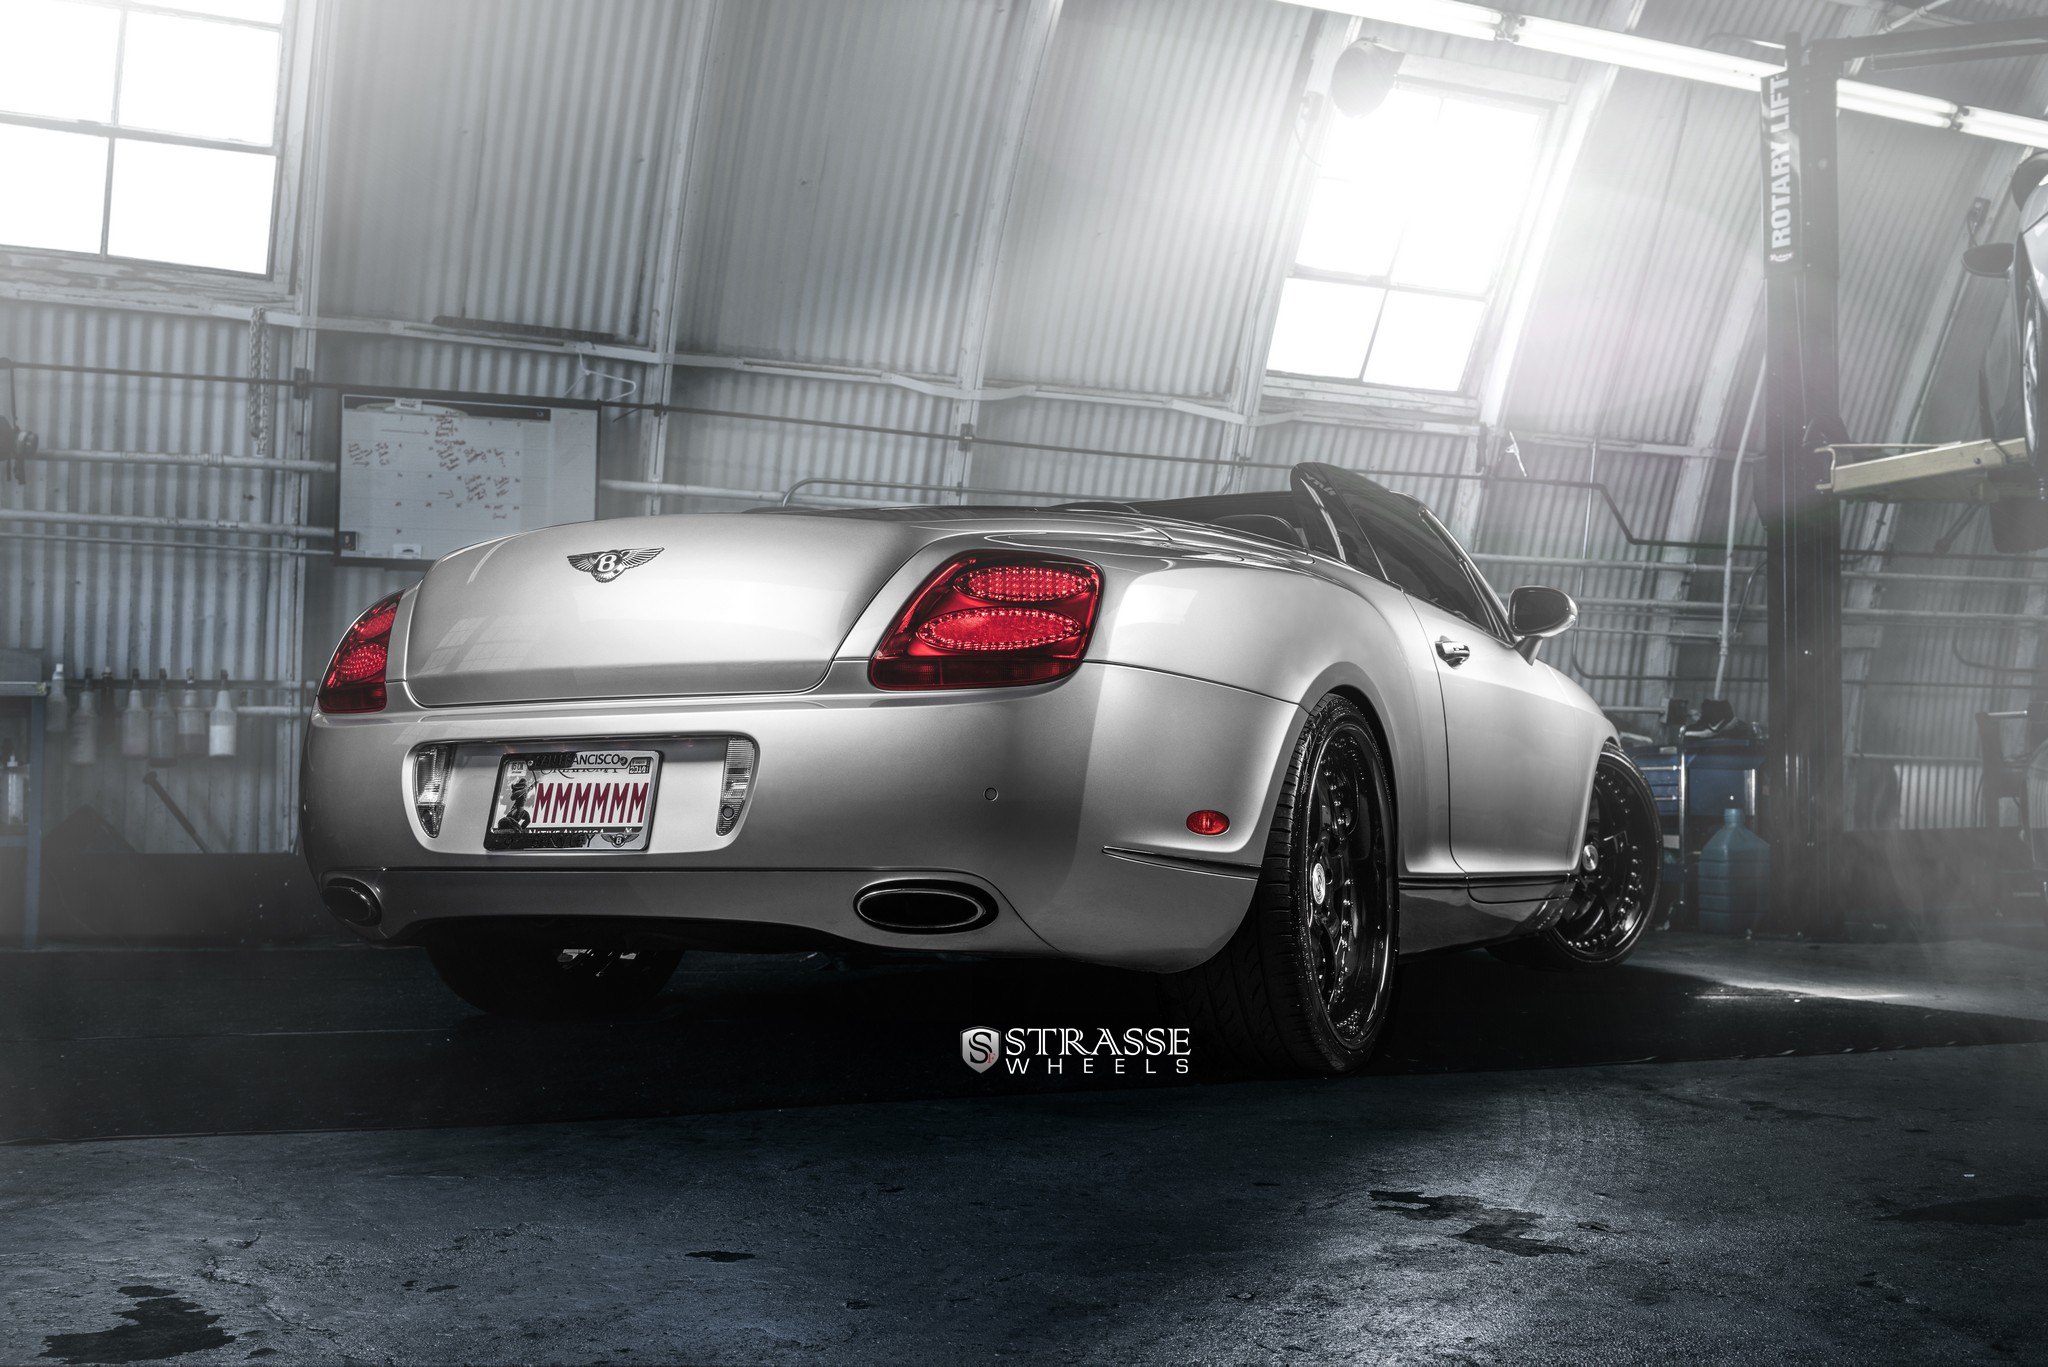 Custom Rear Diffuser on Silver Bentley Continental - Photo by Strasse Forged